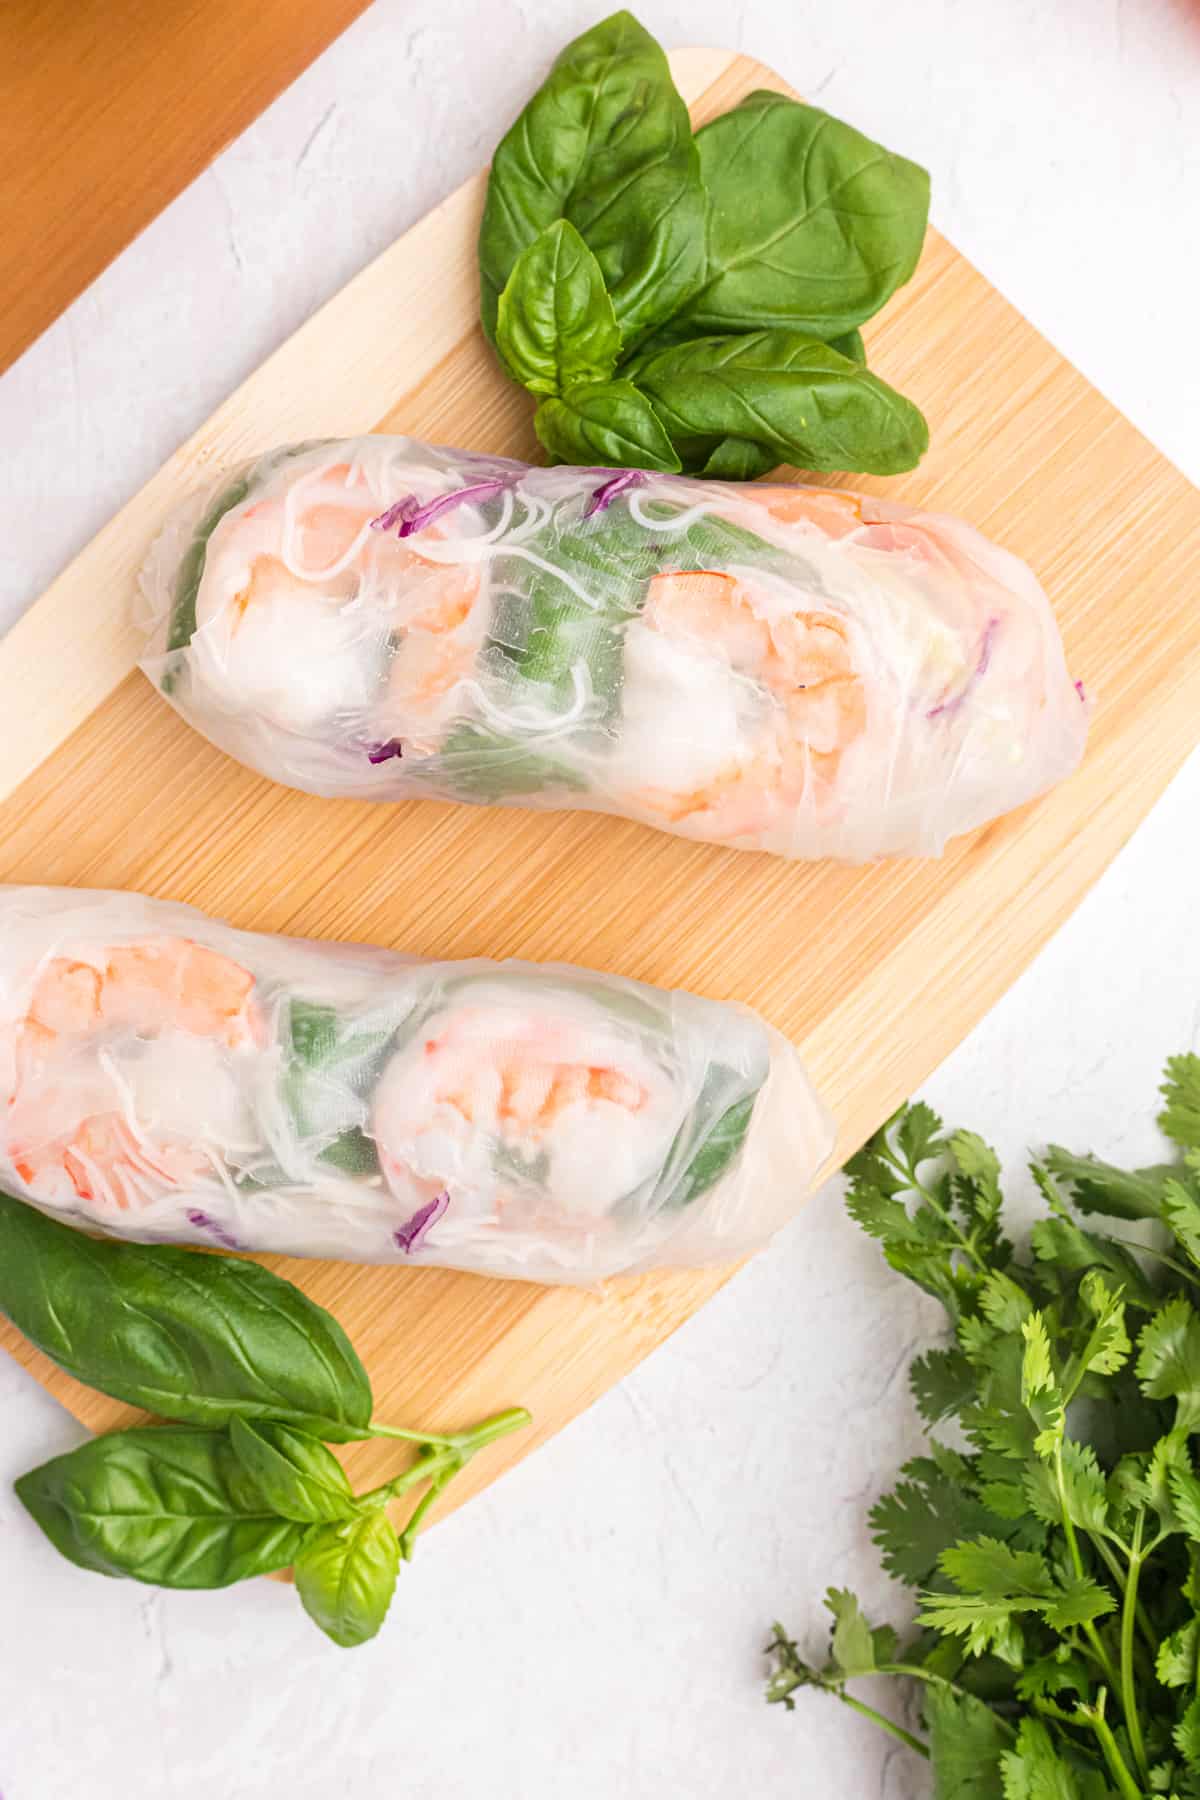 Two summer rolls are placed on a wooden cutting board. 